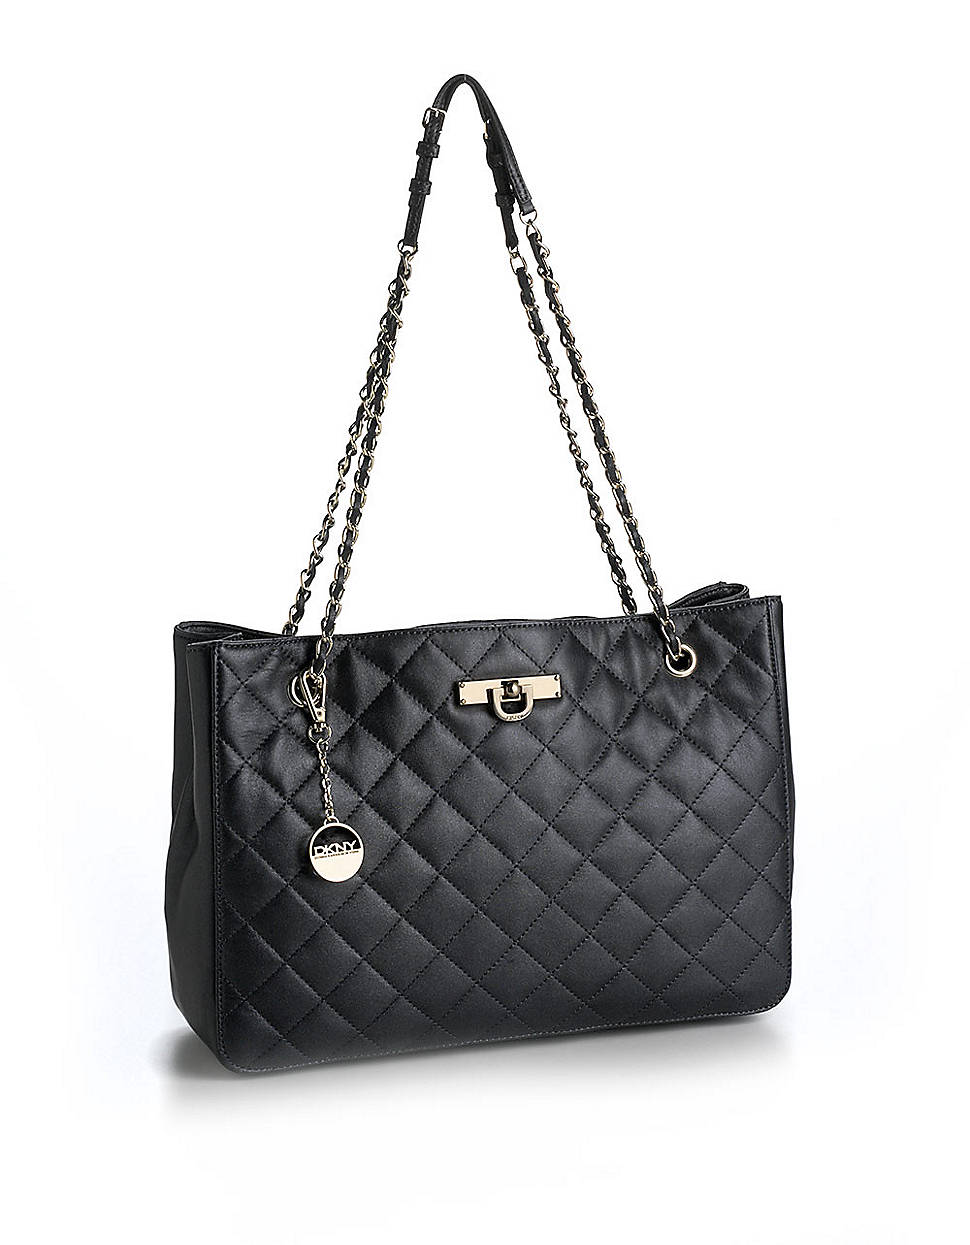 Dkny Quilted Leather Tote Bag in Black